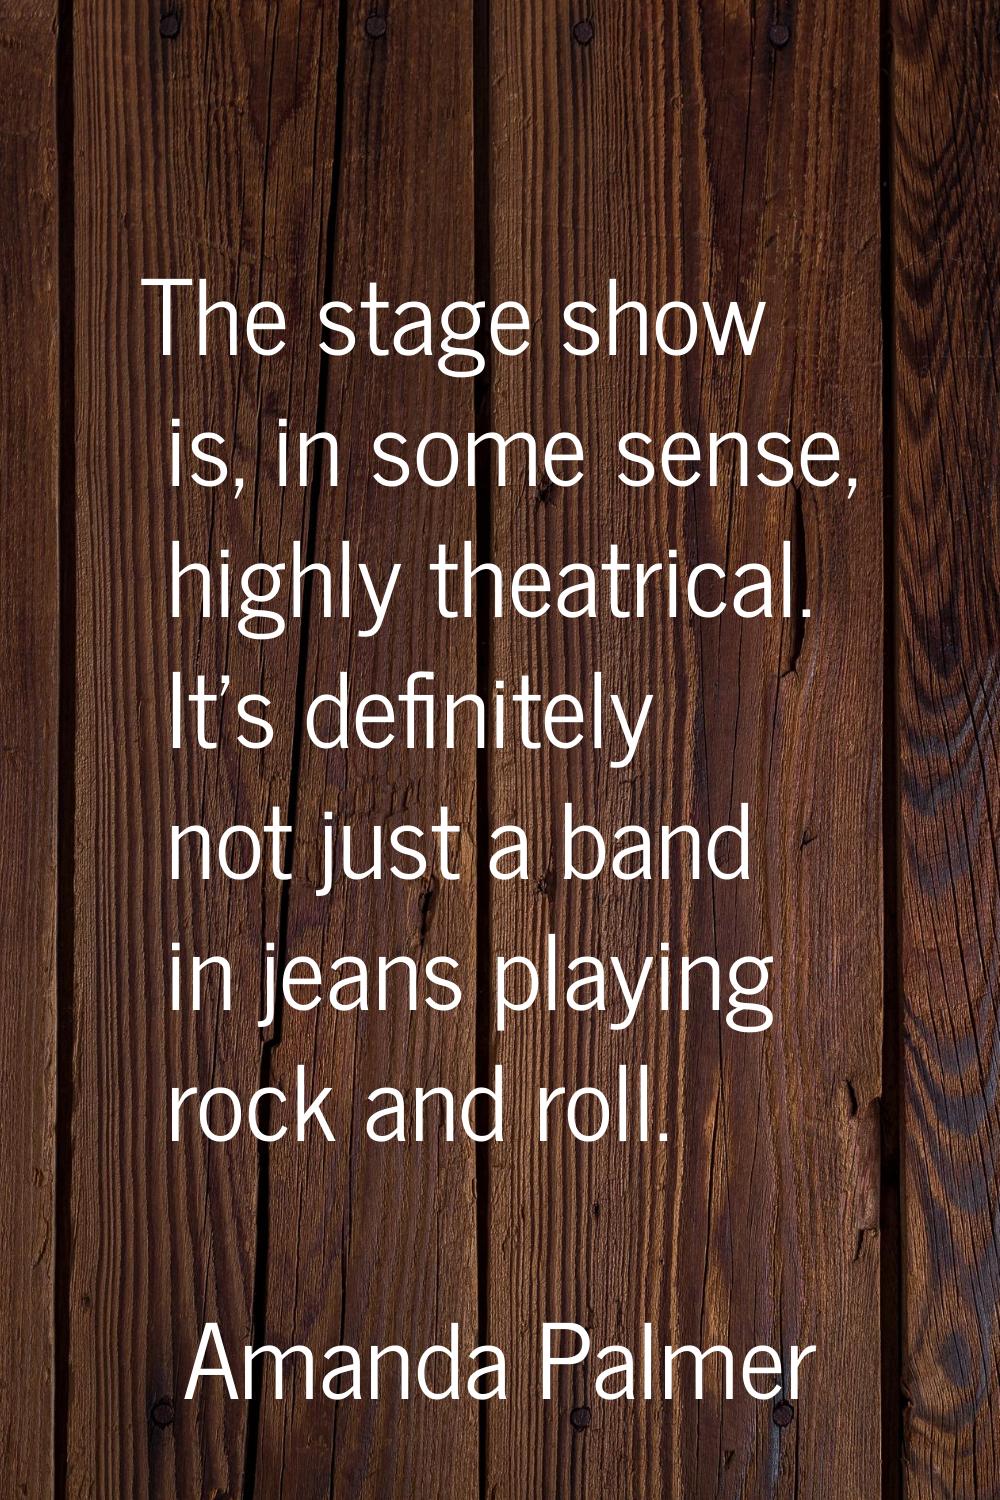 The stage show is, in some sense, highly theatrical. It's definitely not just a band in jeans playi